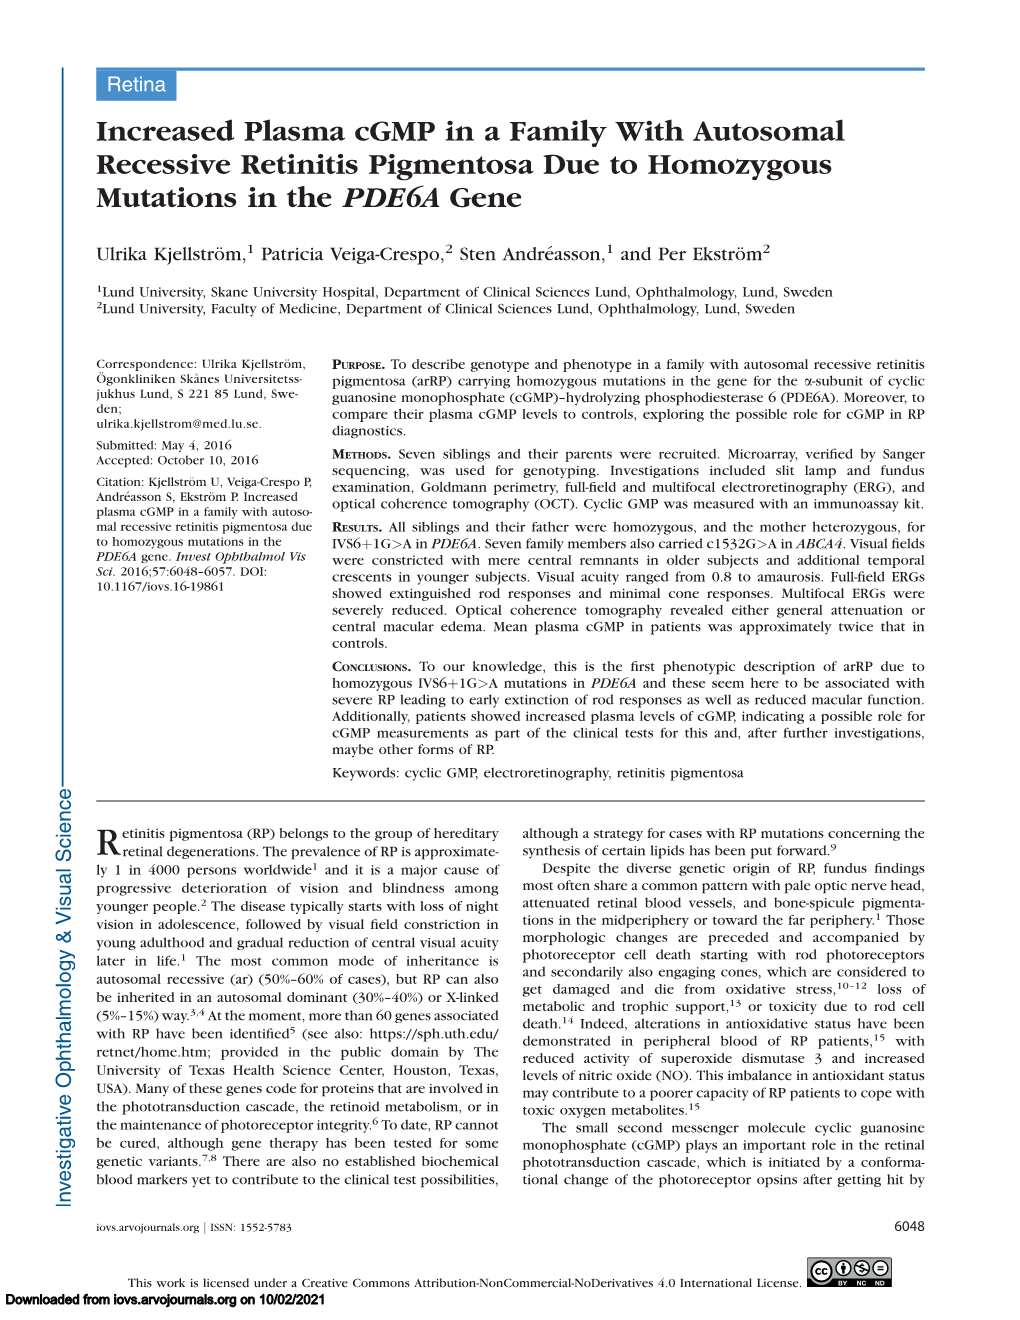 Increased Plasma Cgmp in a Family with Autosomal Recessive Retinitis Pigmentosa Due to Homozygous Mutations in the PDE6A Gene